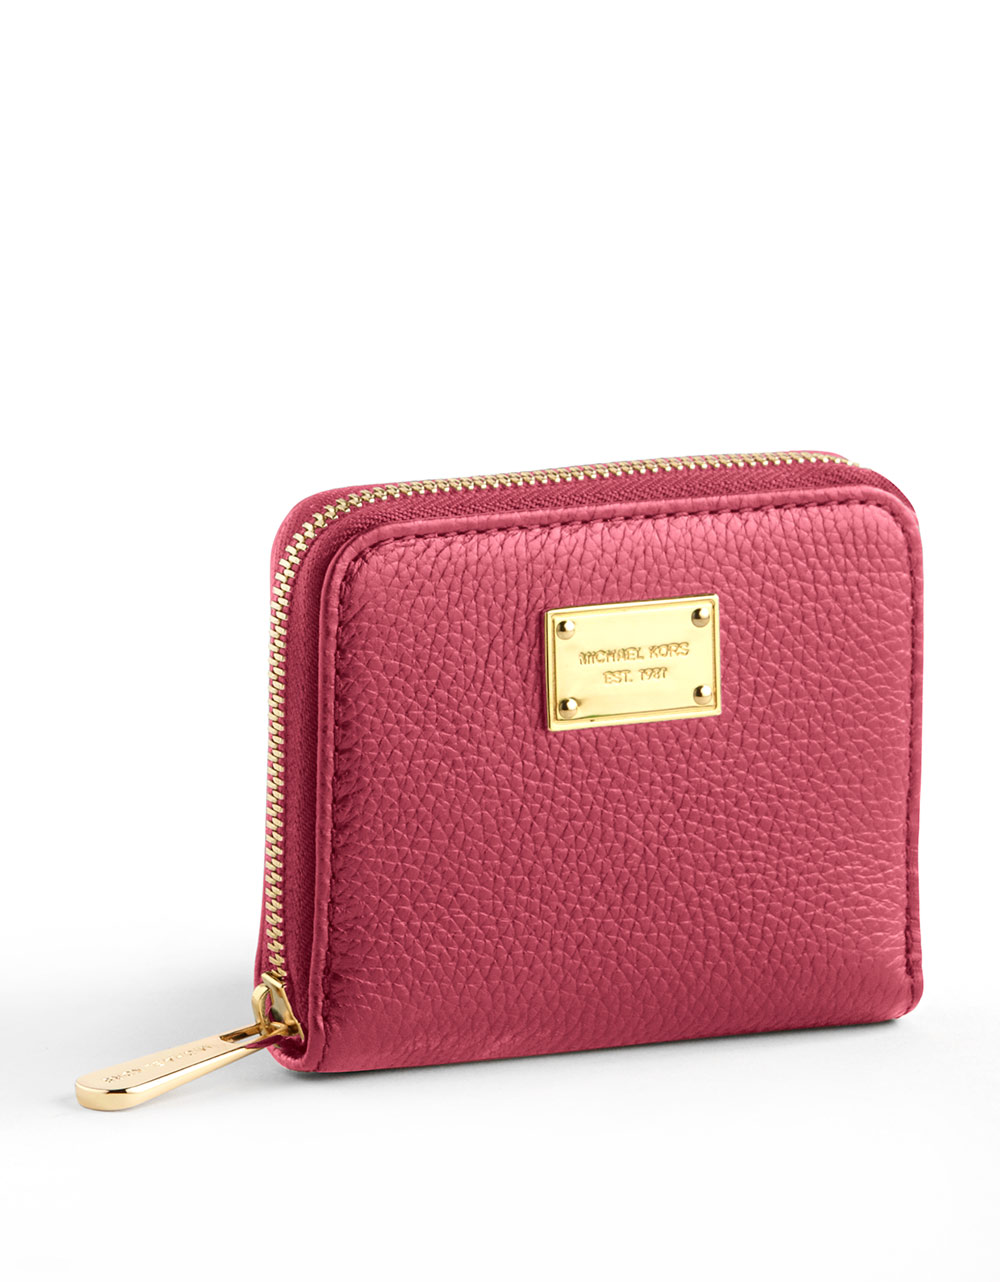 Lyst - Michael michael kors Small Zip Around Leather Wallet in Red